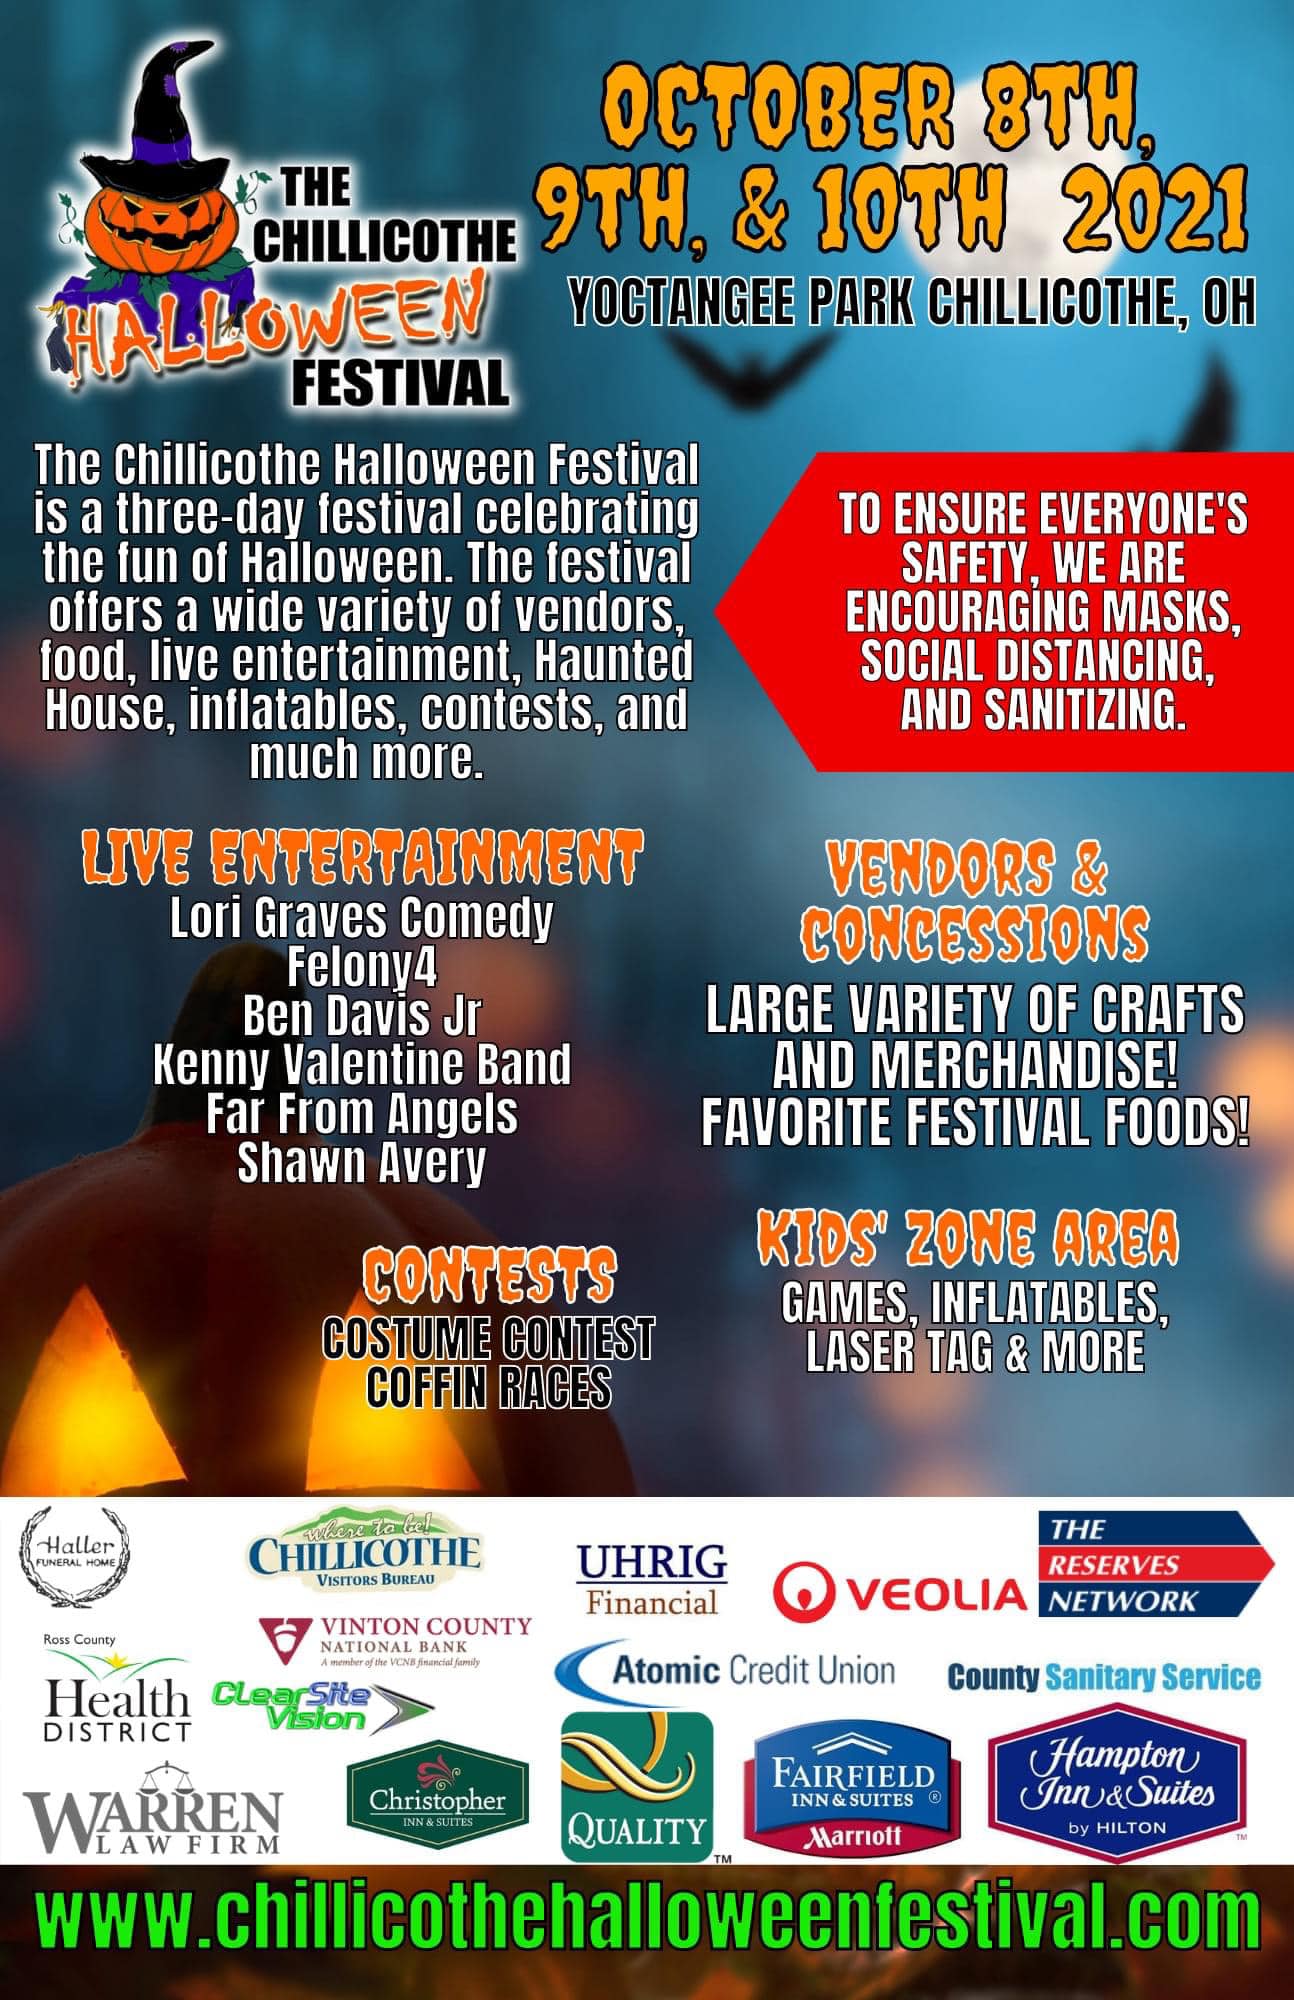 Chillicothe Halloween Festival Releases Information on Event Scioto Post